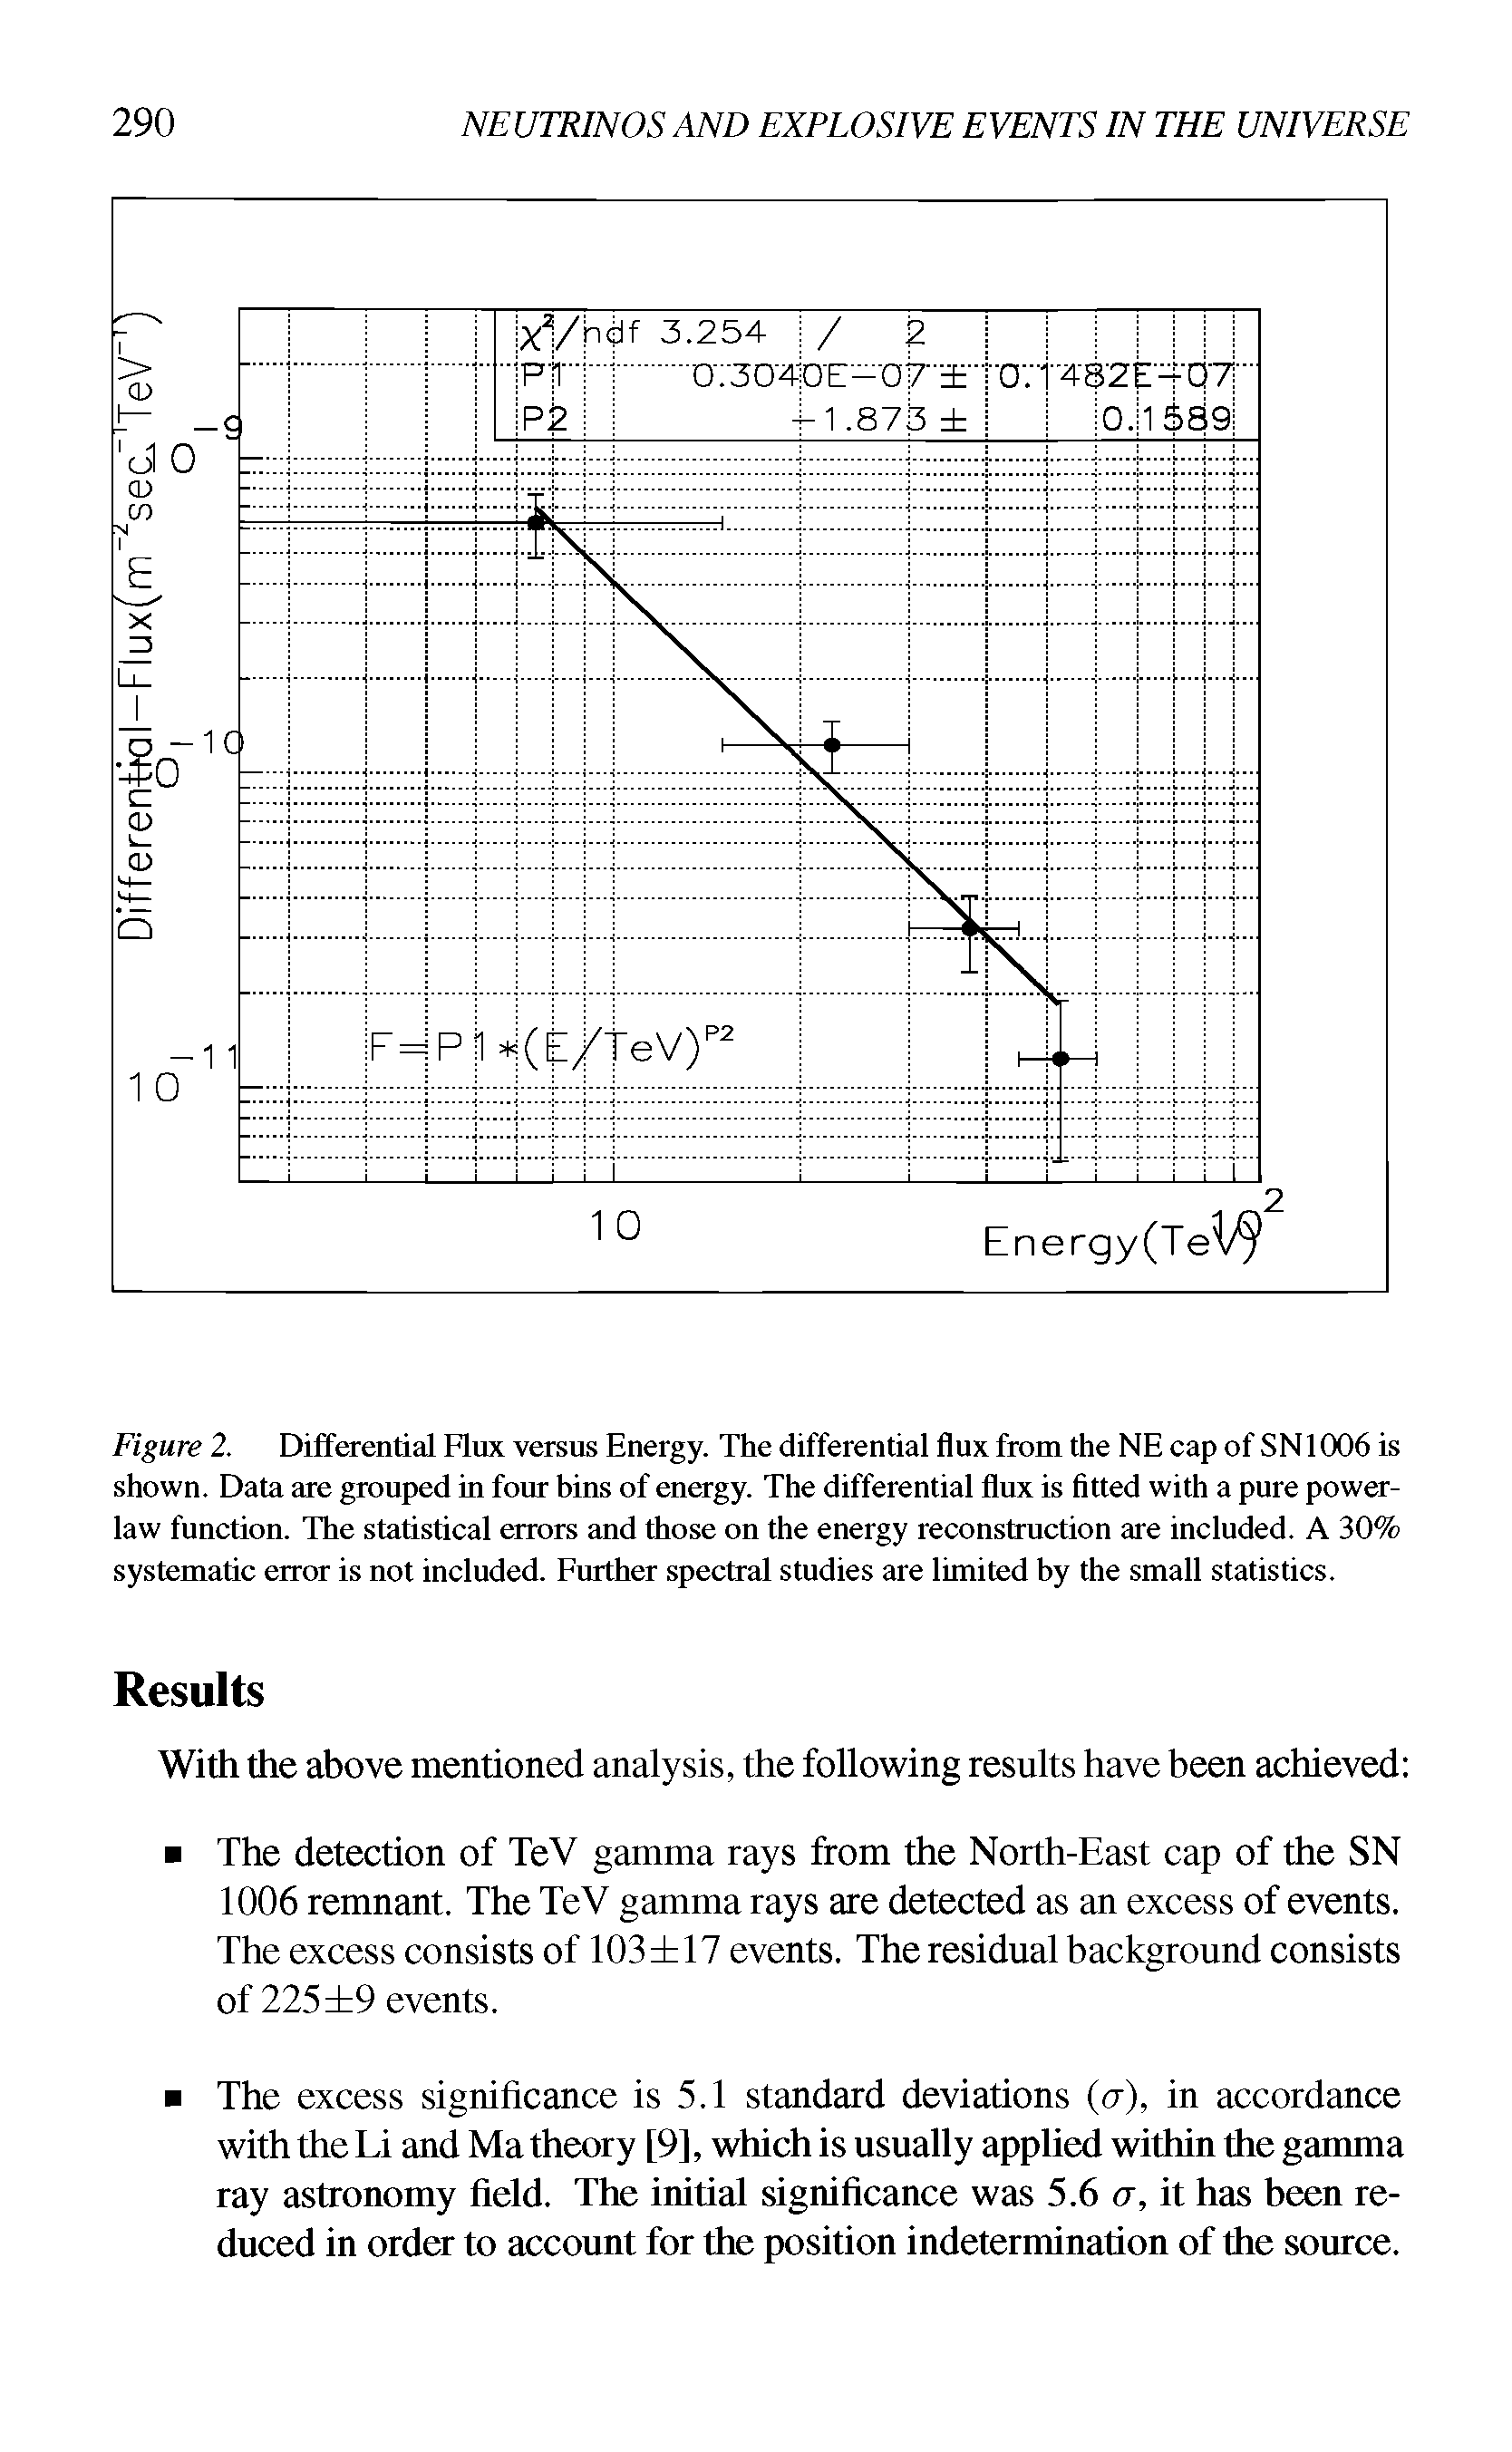 Figure 2. Differential Flux versus Energy. The differential flux from the NE cap of SN1006 is shown. Data are grouped in four bins of energy. The differential flux is fitted with a pure power-law function. The statistical errors and those on the energy reconstruction are included. A 30% systematic error is not included. Further spectral studies are limited by the small statistics.